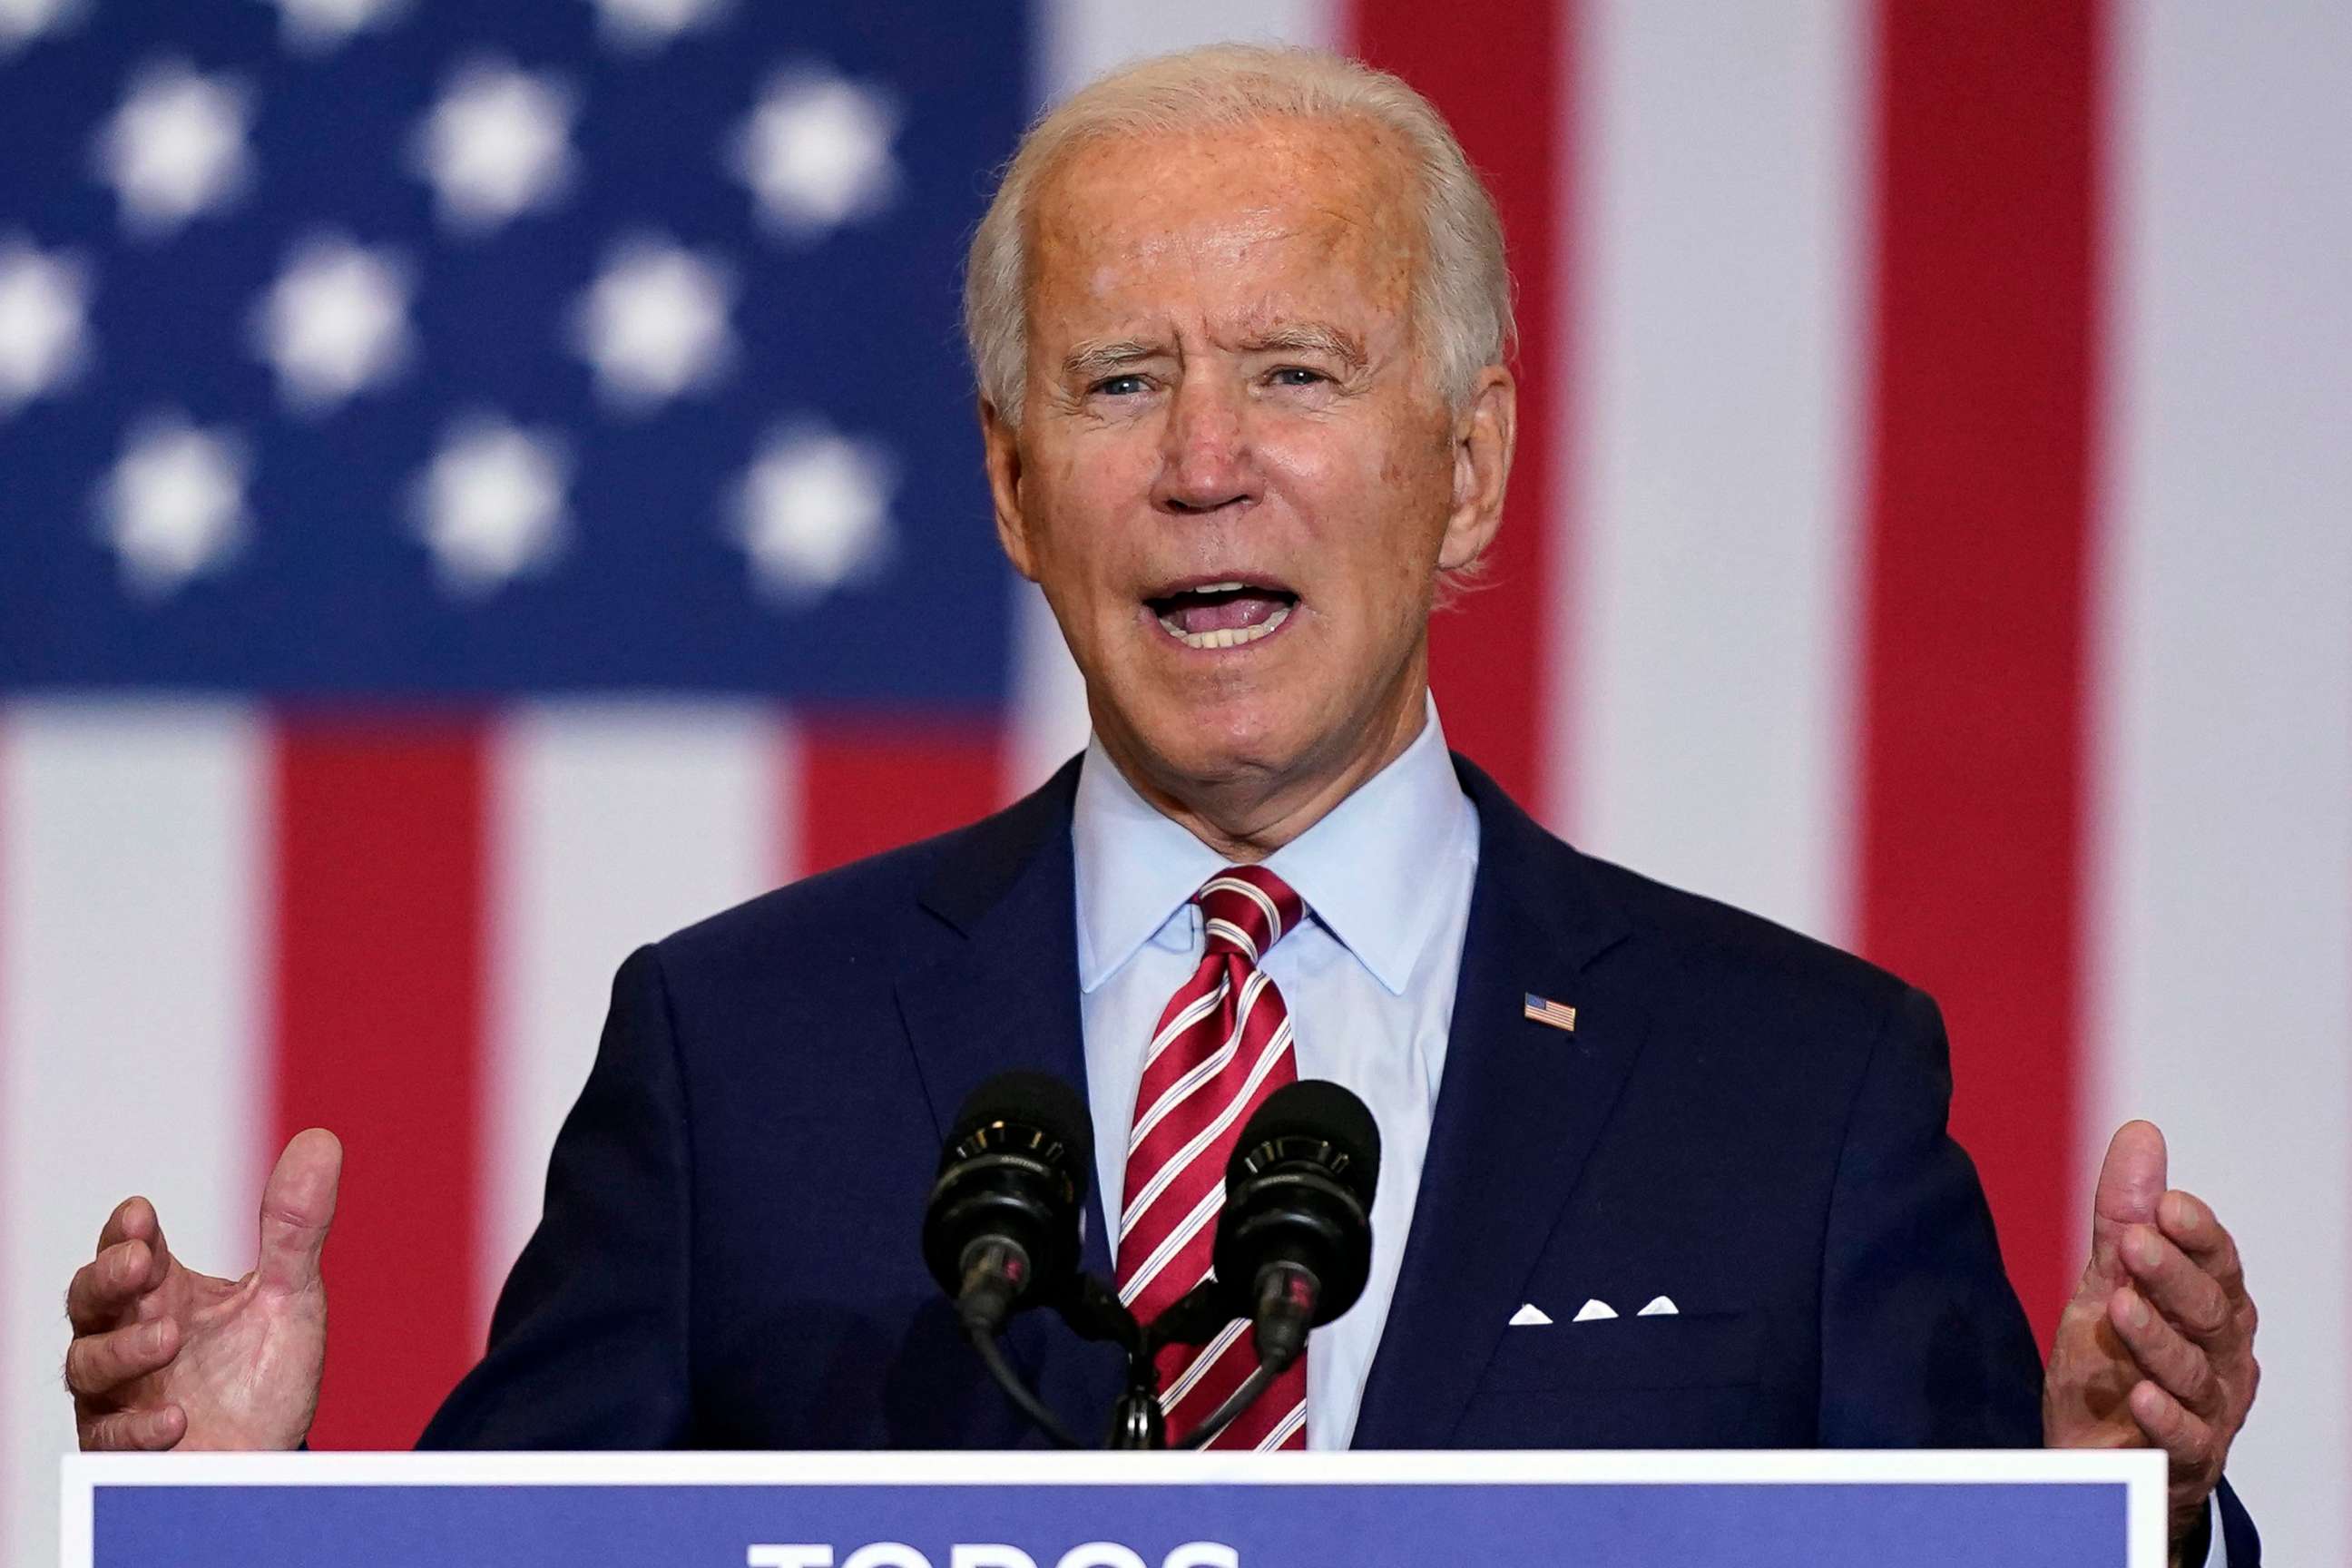 PHOTO: Democratic presidential candidate former Vice President Joe Biden speaks during a Hispanic Heritage Month event, Sept. 15, 2020, at Osceola Heritage Park in Kissimmee, Fla.